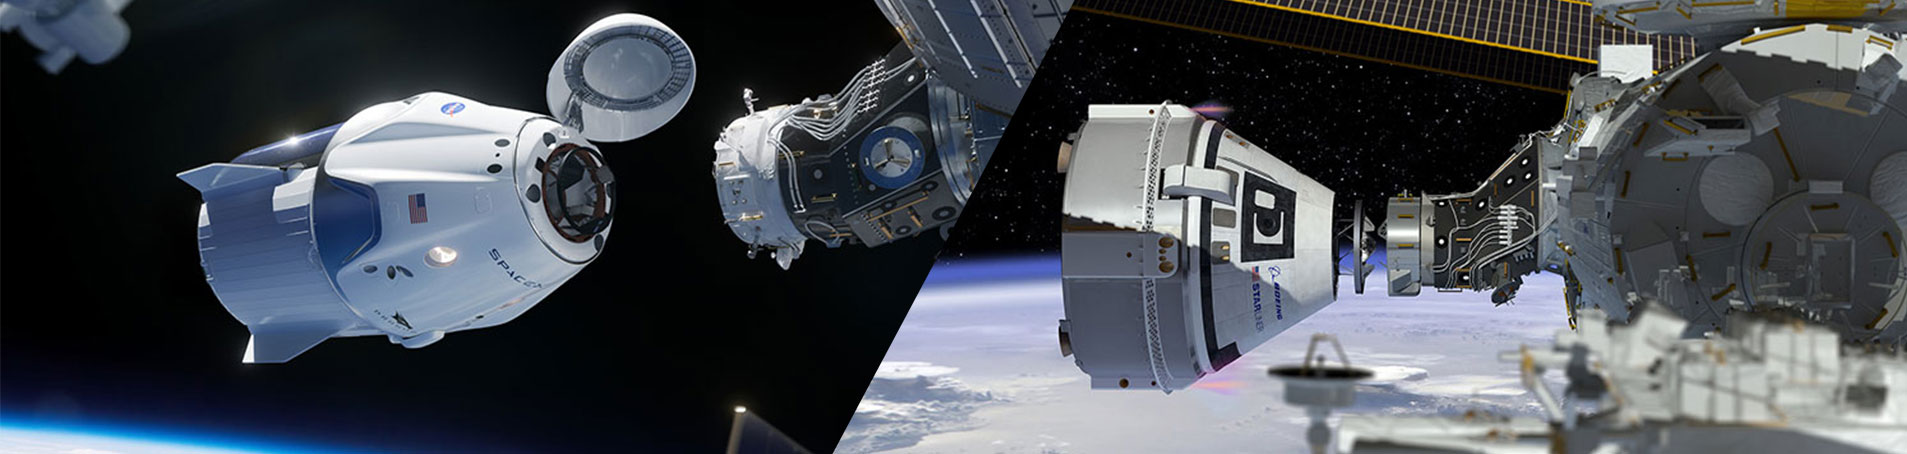 Artist renderings of the Commercial Crew capsules, including the Boeing CST-100 Starliner and SpaceX Crew Dragon